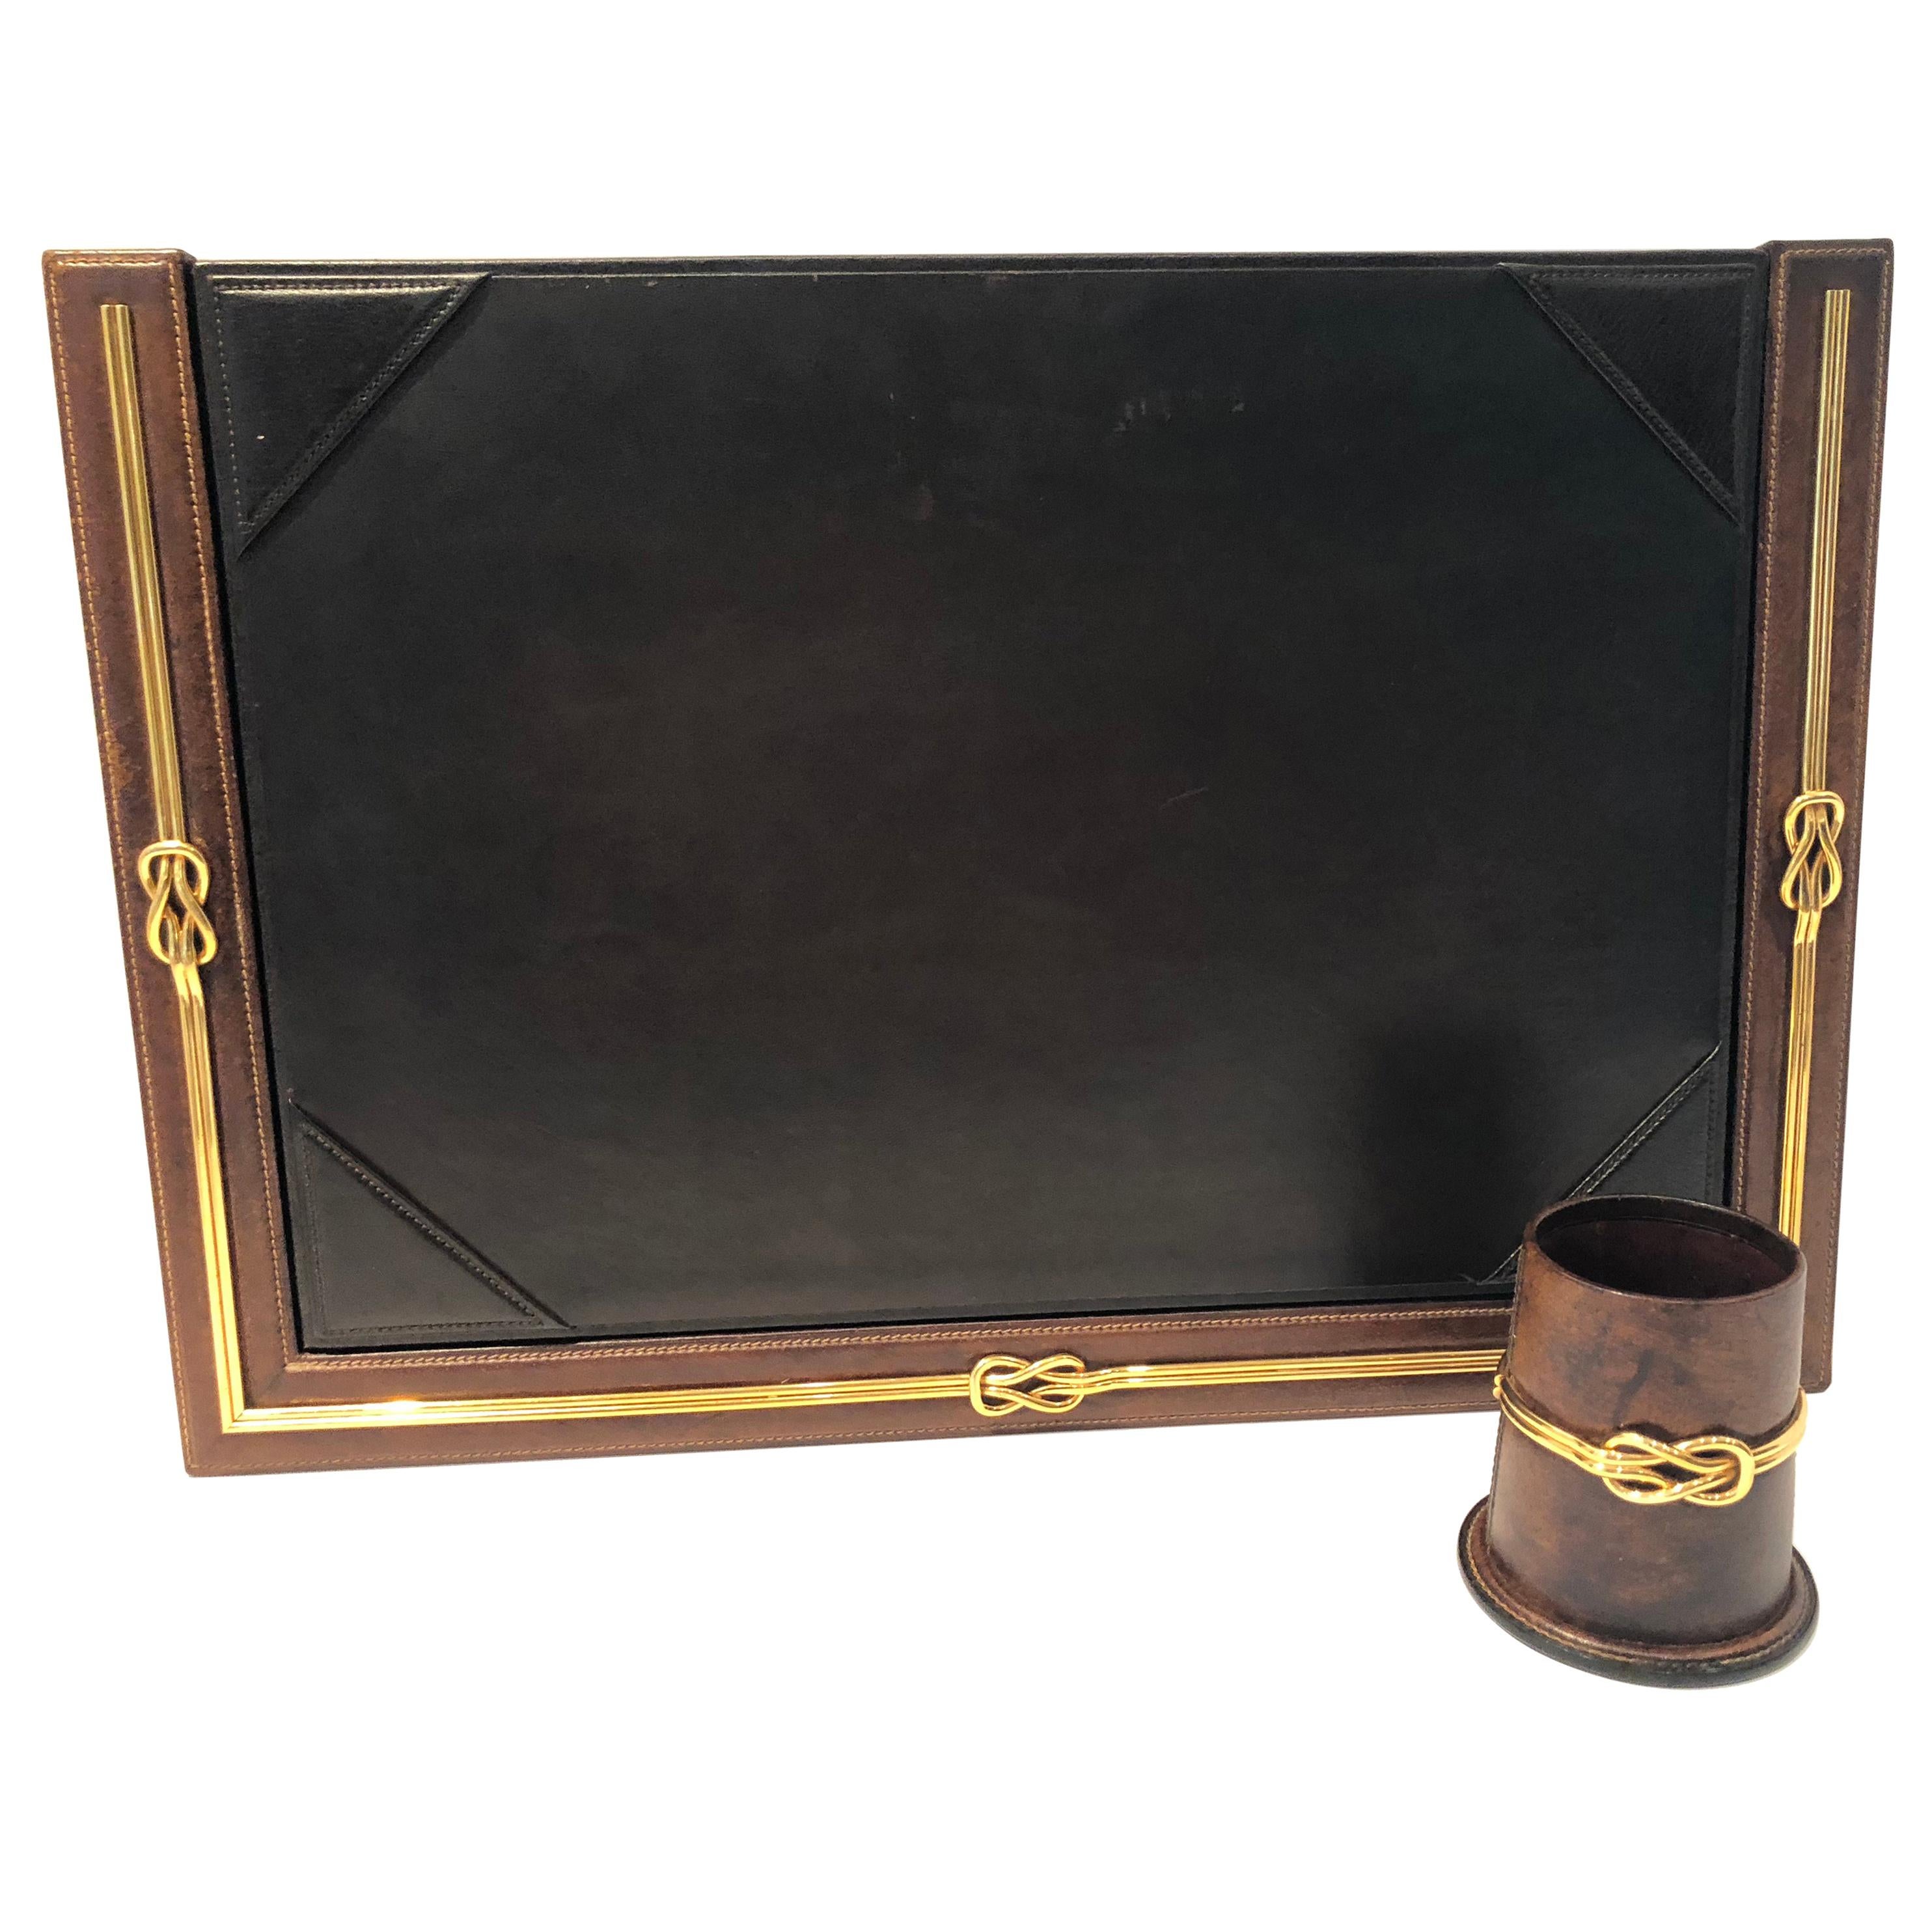 Best Dressed Executive's Leather and Gold Gucci Desk Set